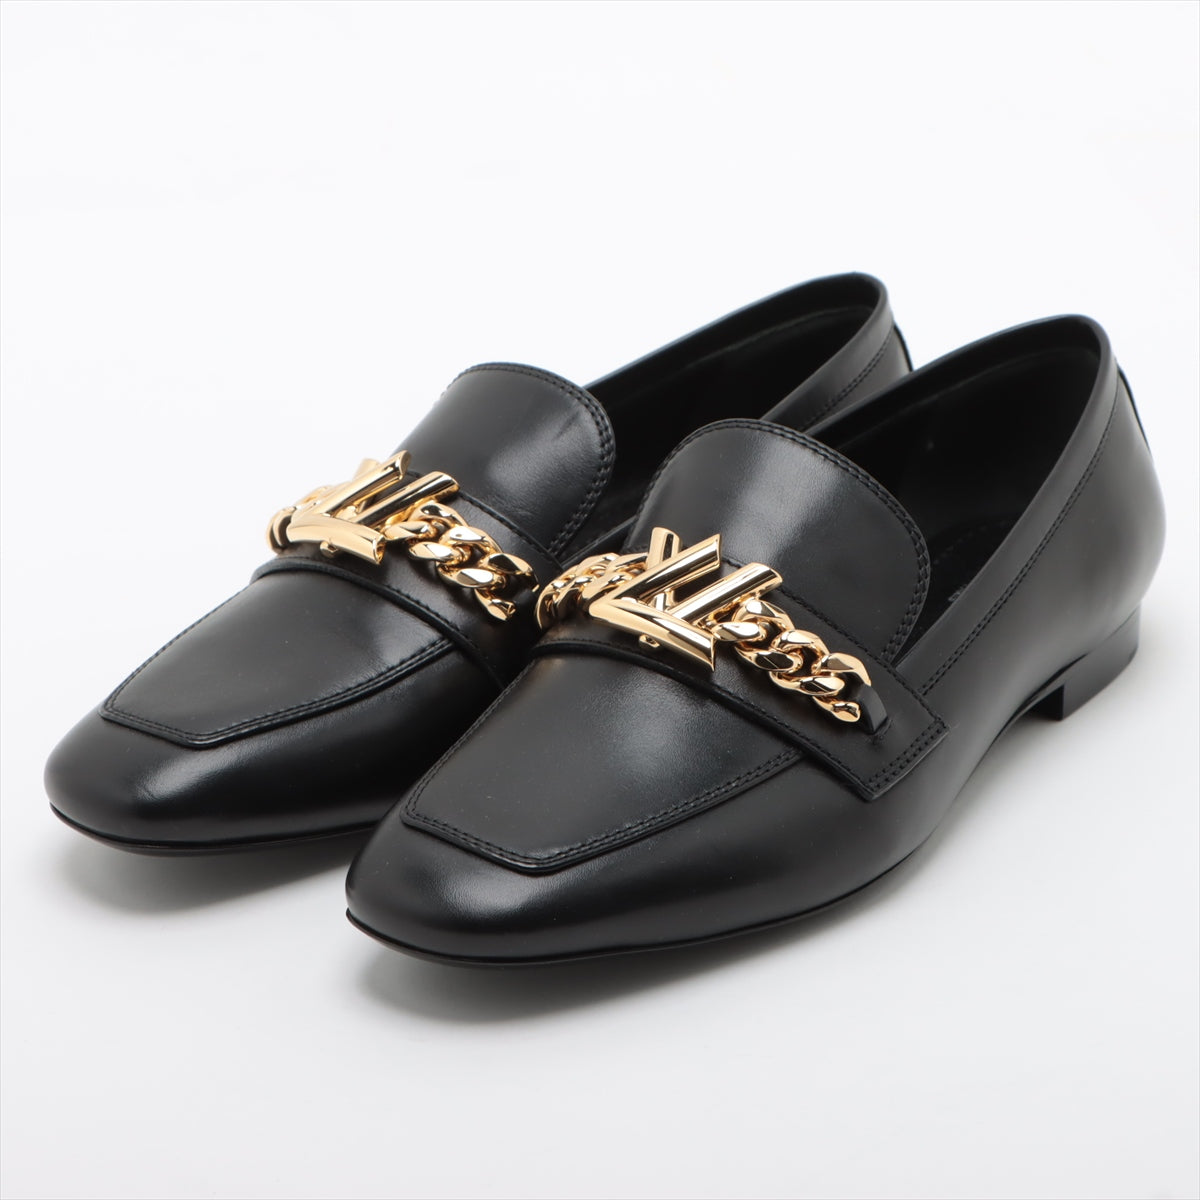 Louis Vuitton Upper case line 18 years Leather Loafer 35 1/2 Ladies' Black SC0178 box There is a bag